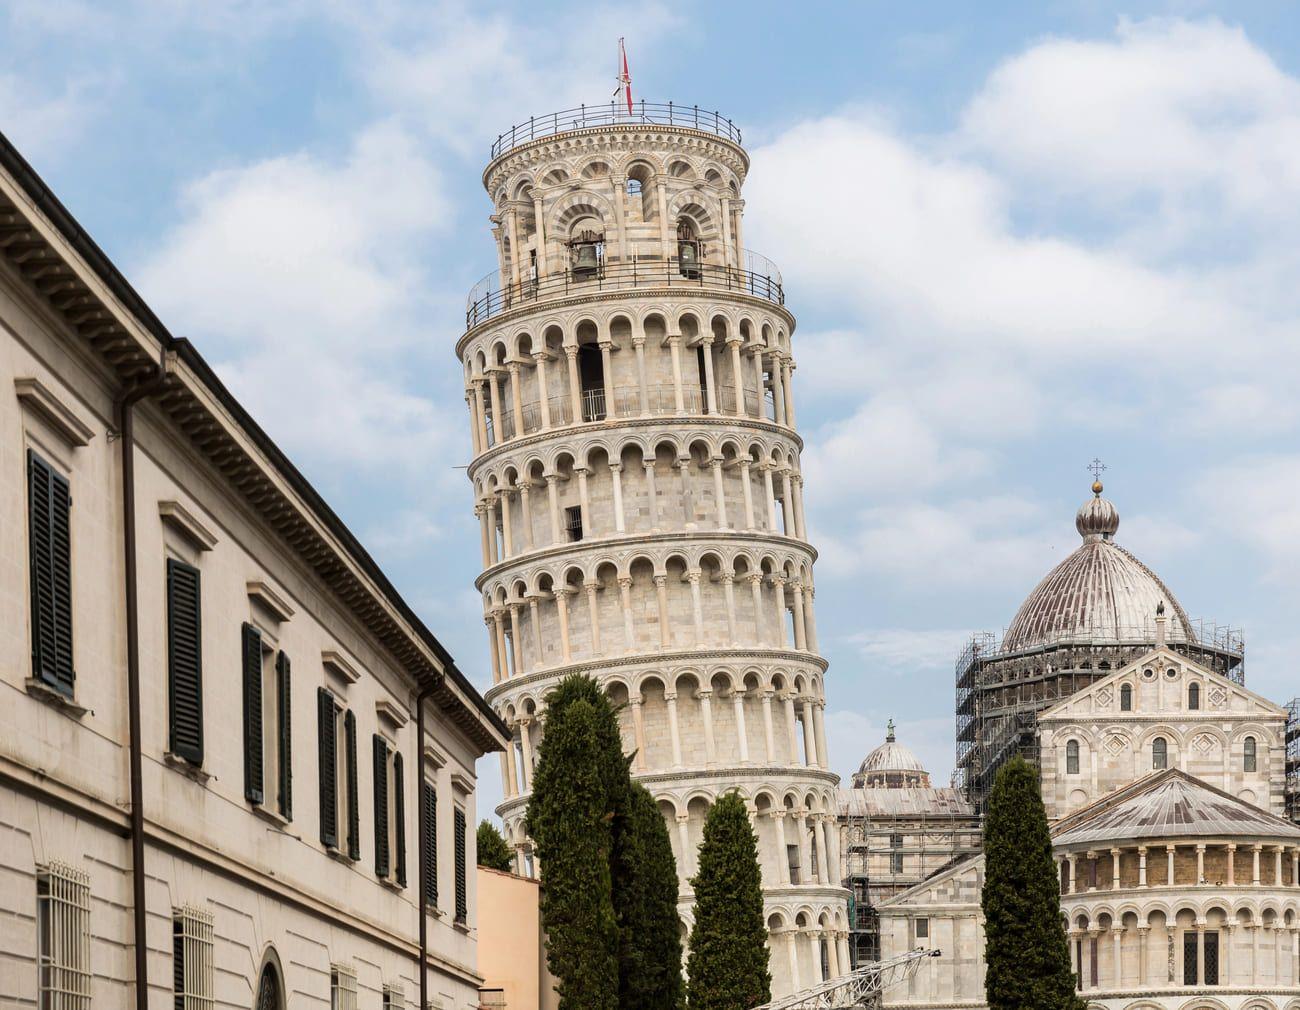 How Engineers Stopped the Leaning Tower of Pisa from Falling - a Story that will Make You Wonder